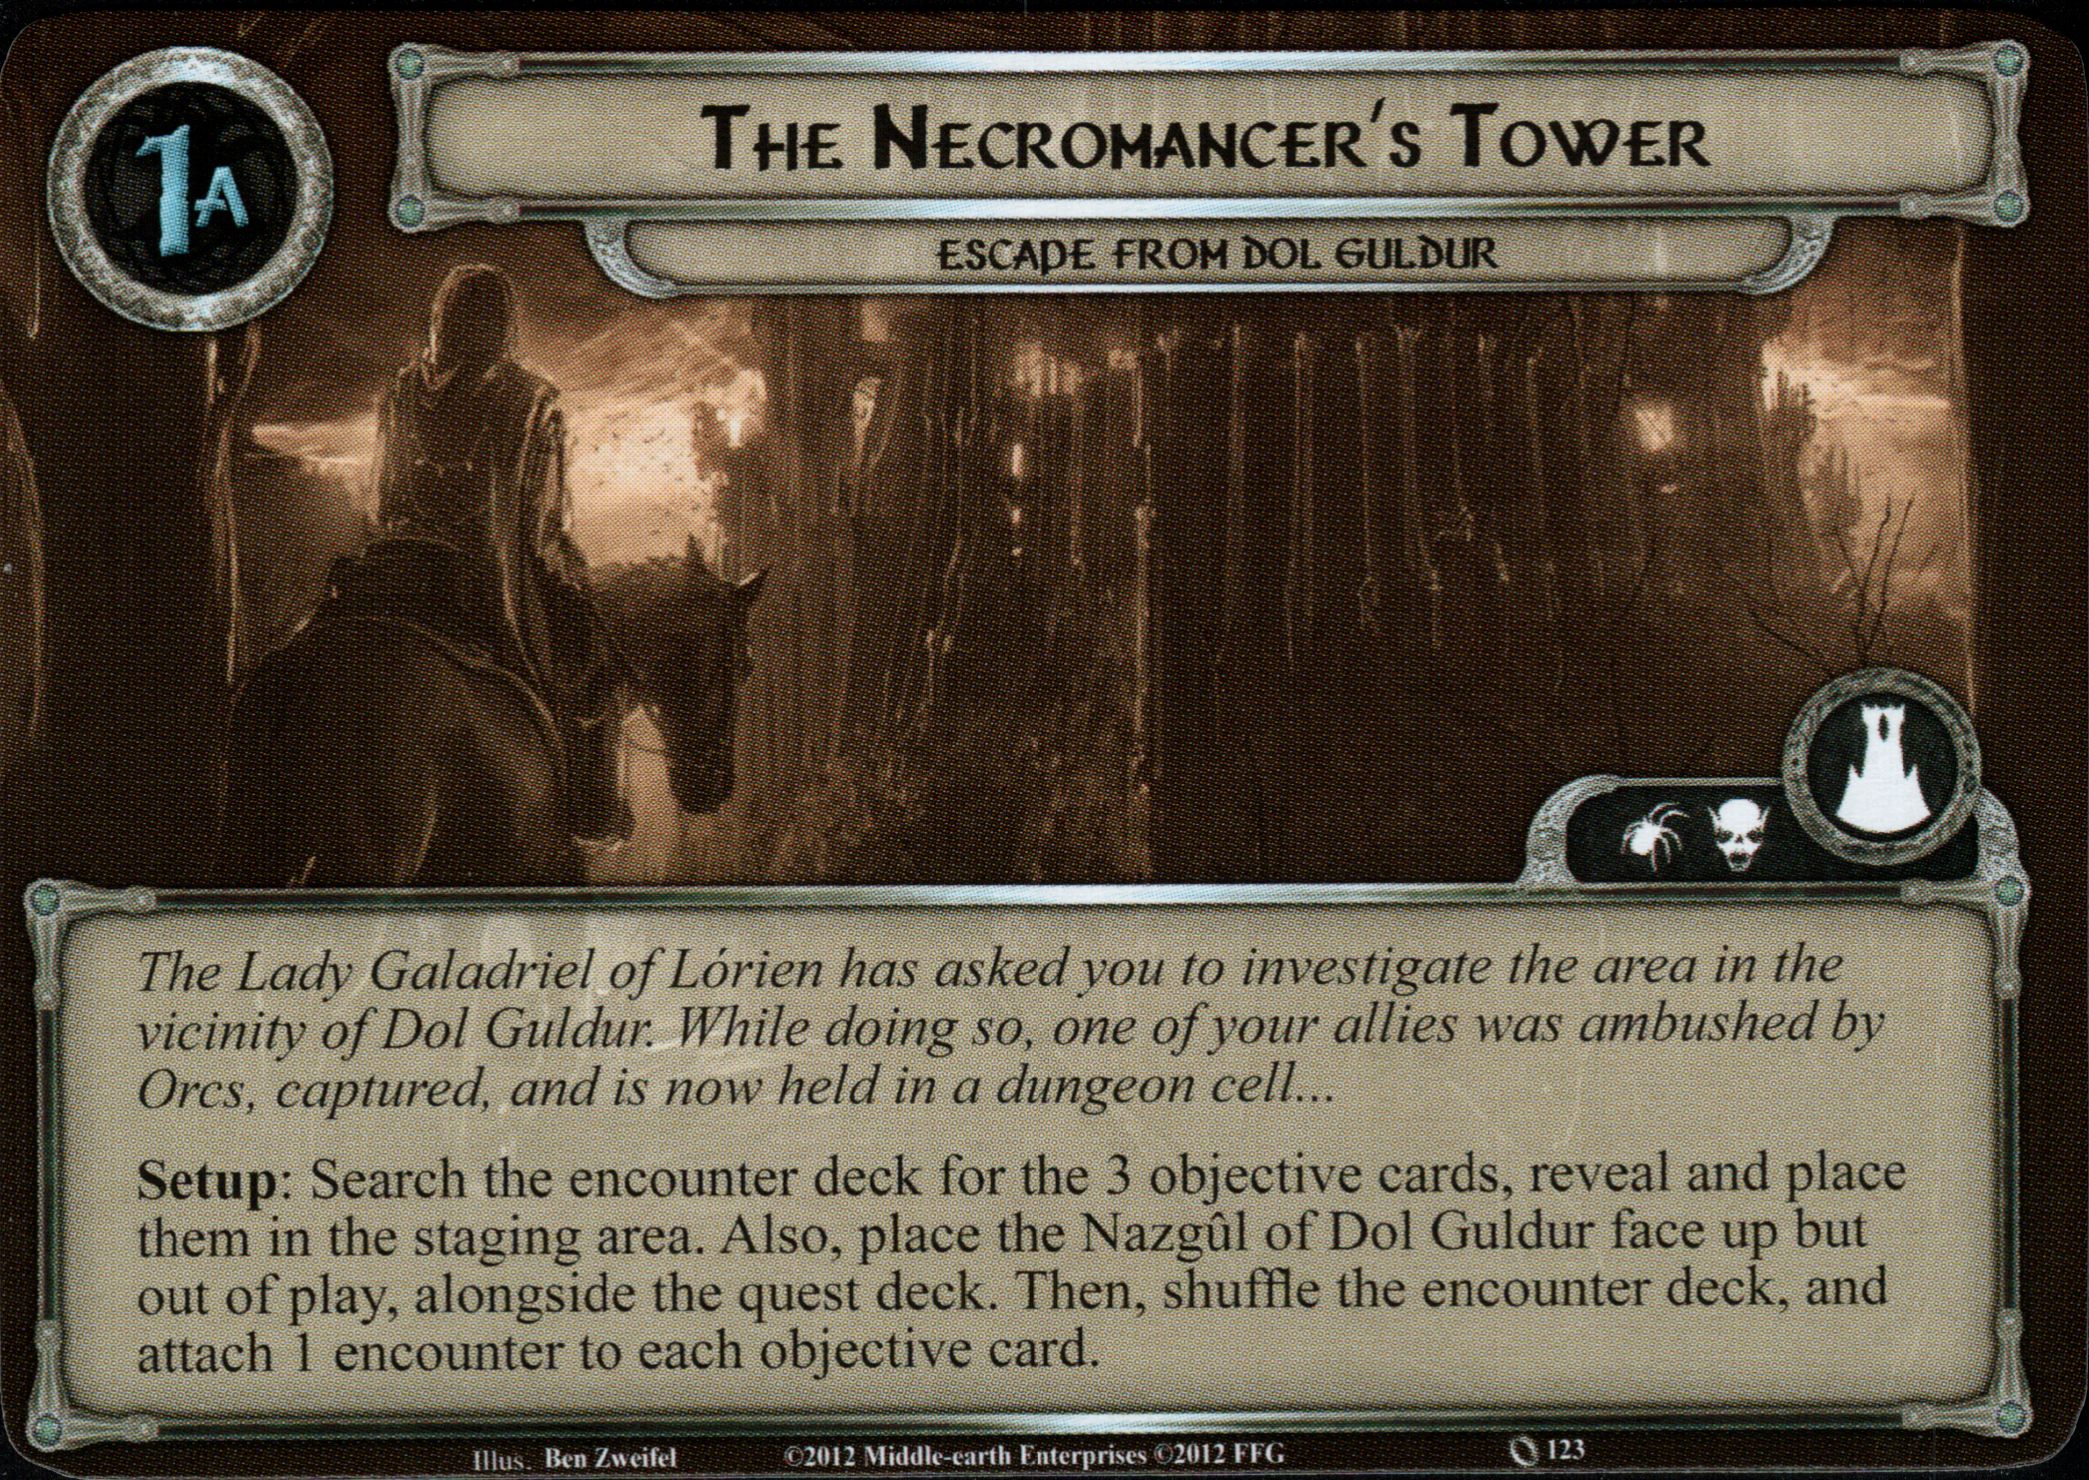 The Necromancer's Tower - Escape From Dol Guldor